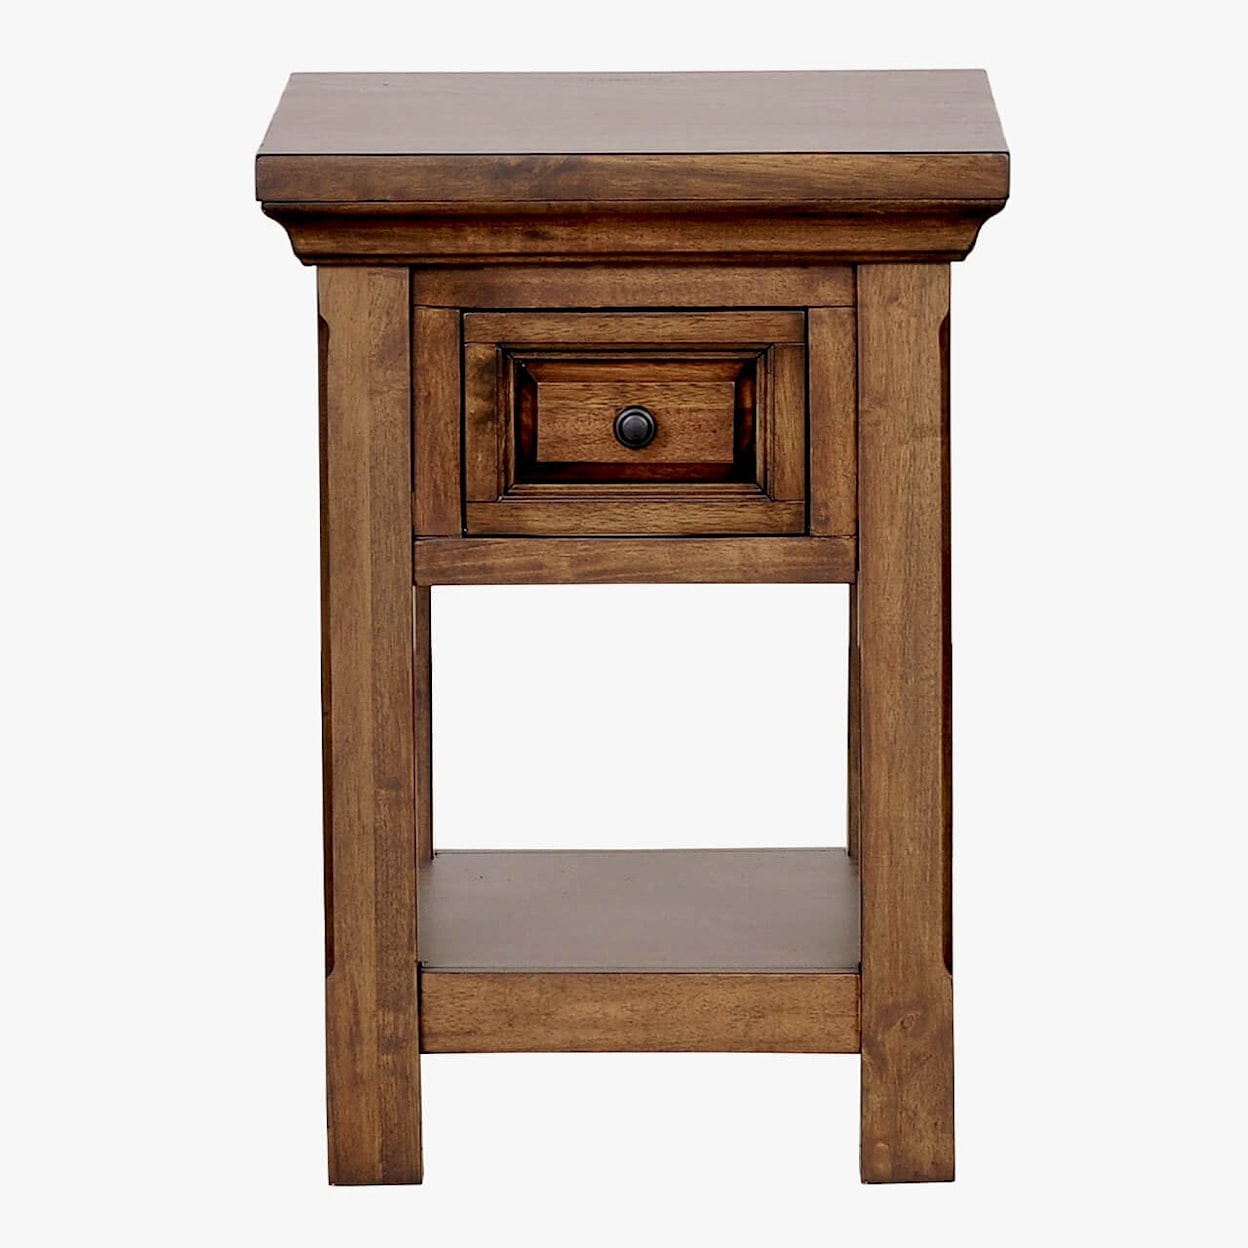 Harris Furniture Hill Crest Chairside Table